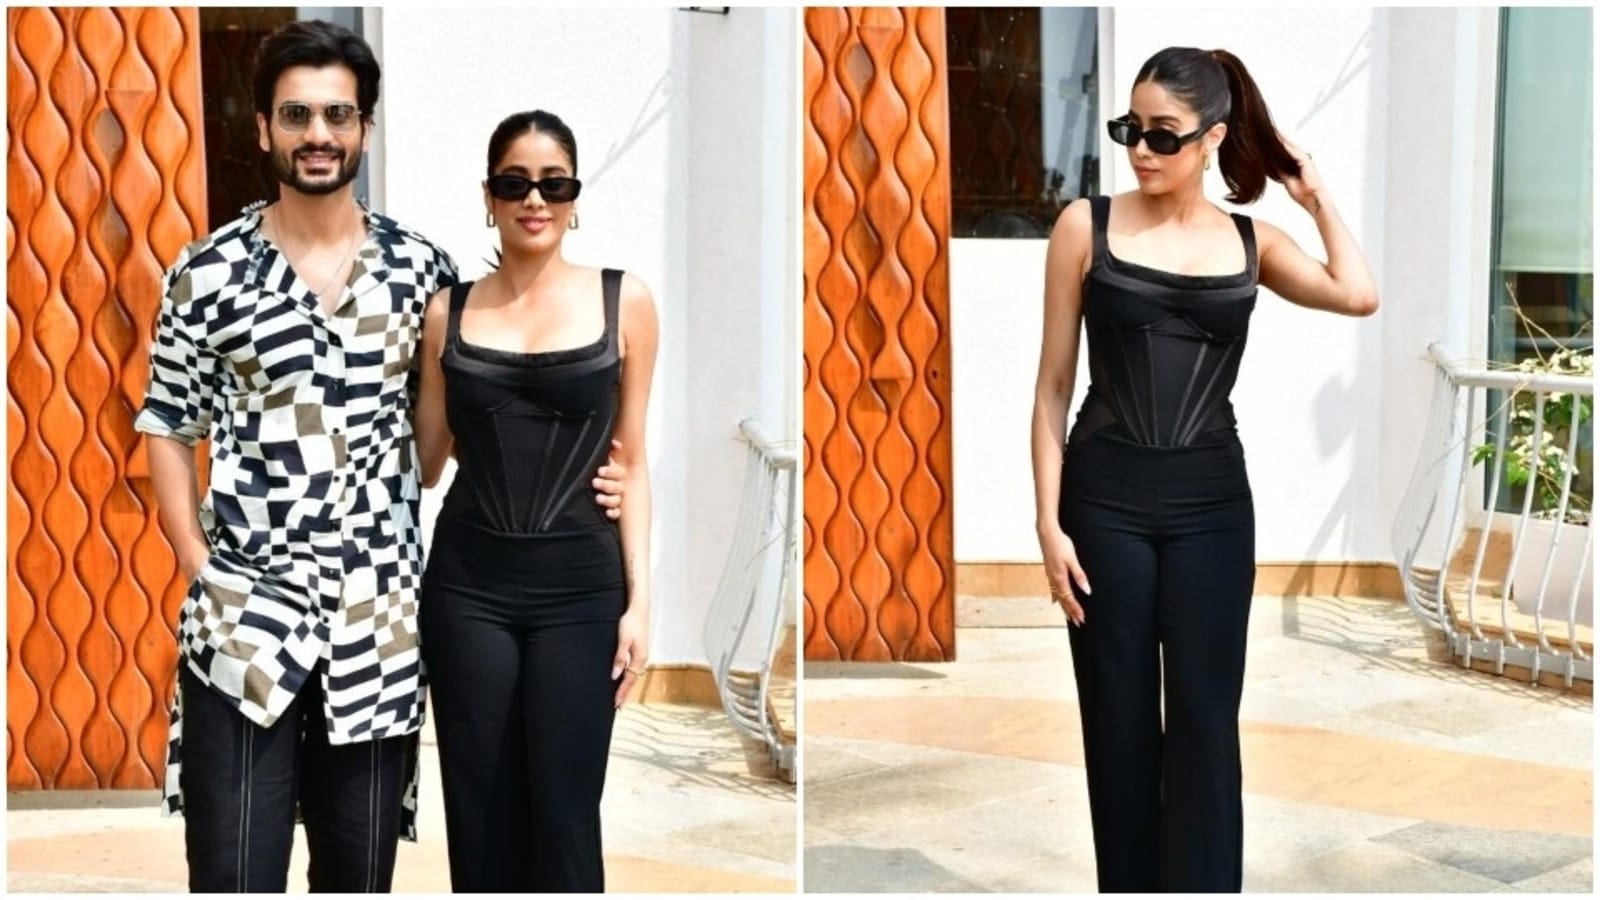 janhvi-kapoor-serves-a-bombshell-avatar-in-all-black-outfit-with-sunny-kaushal-at-mili-promotions-see-pics-inside